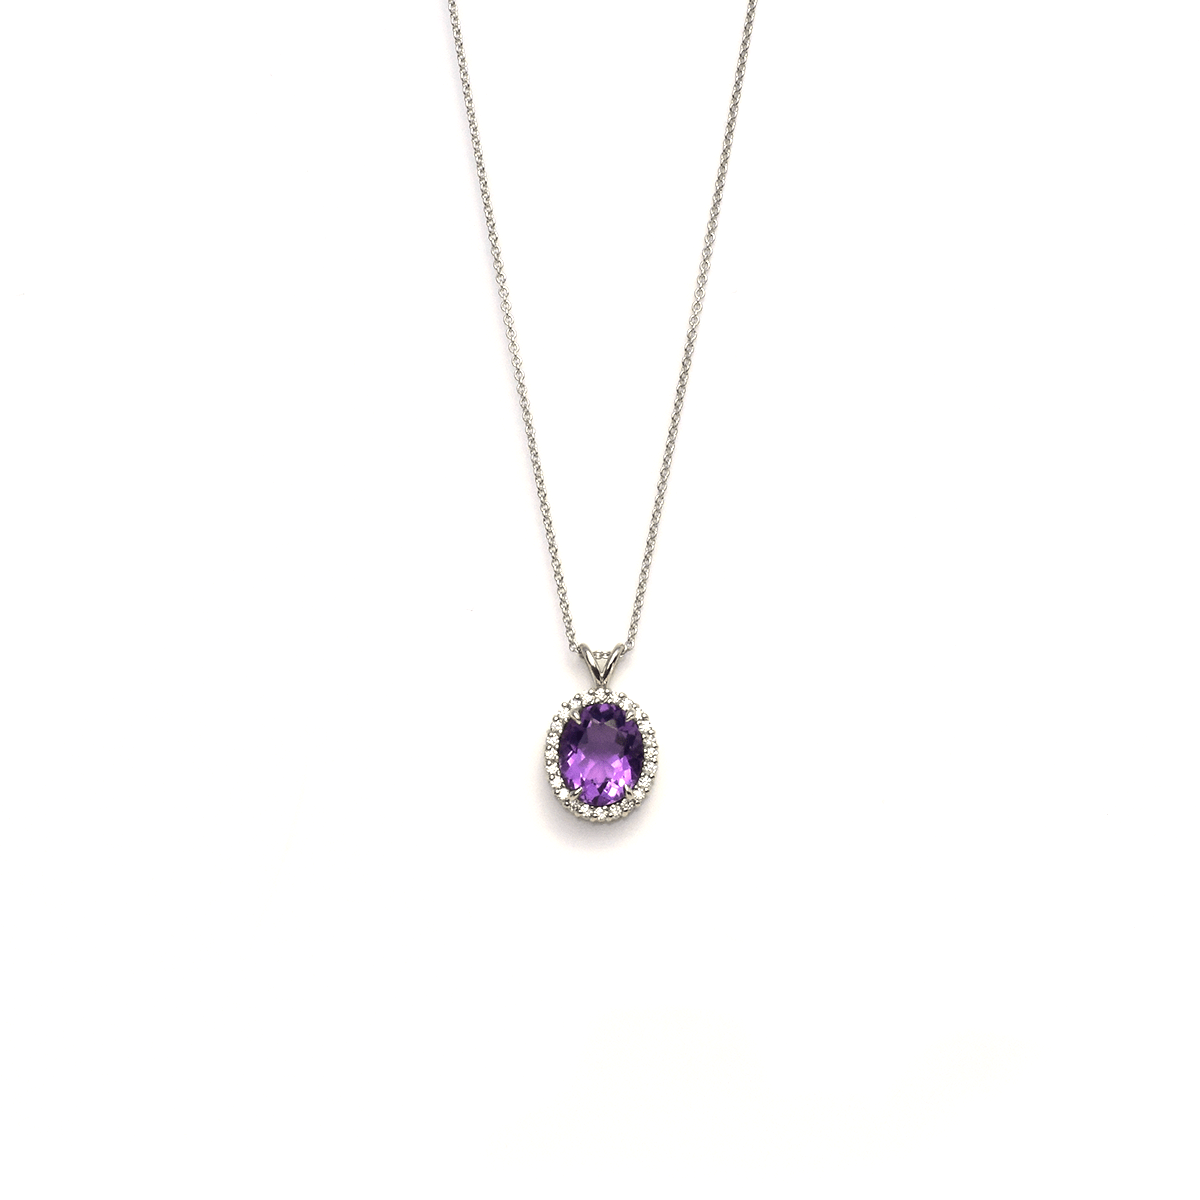 The Throne - Oval Shaped Amethyst Gemstone and Diamonds Necklace